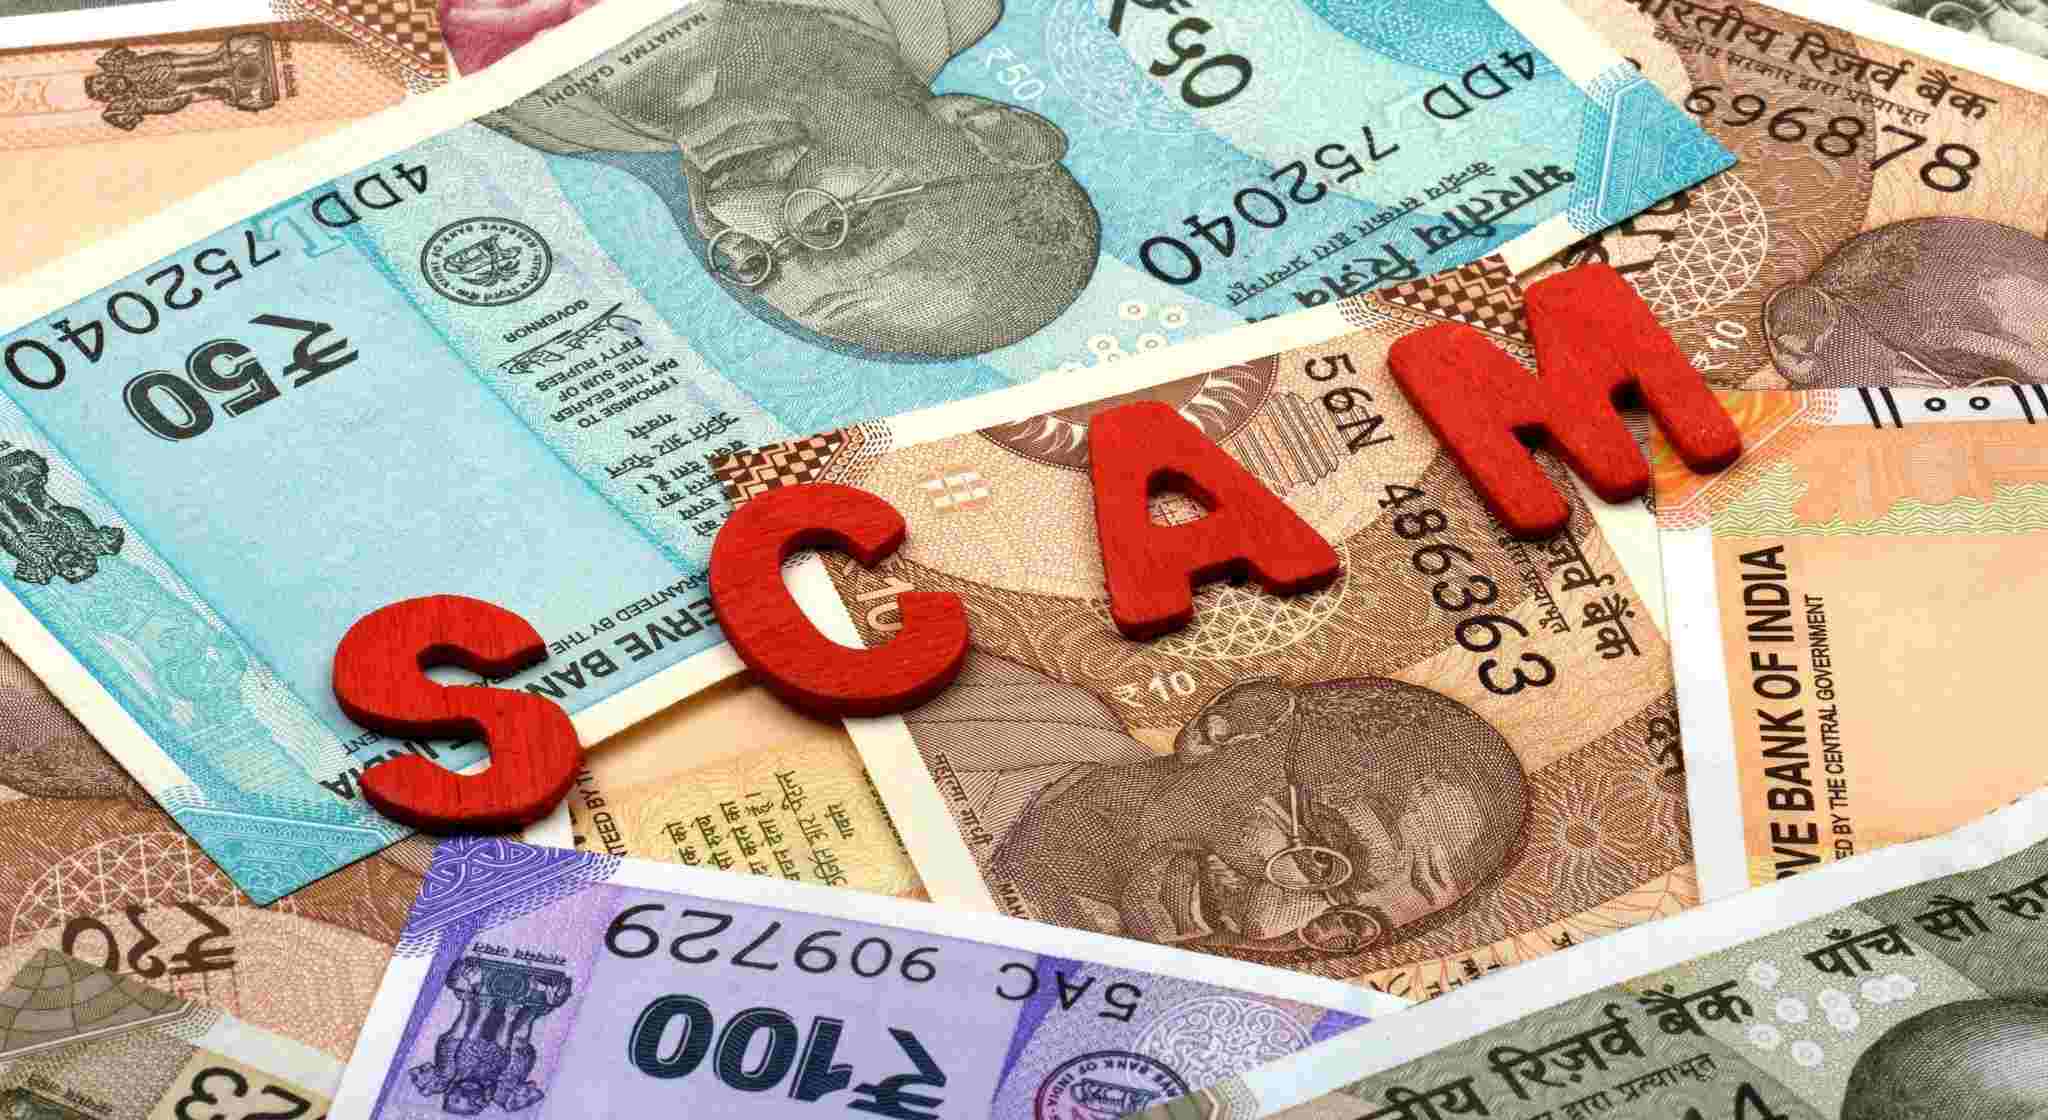 Indian Currency with Scam Word, Investment Scam.